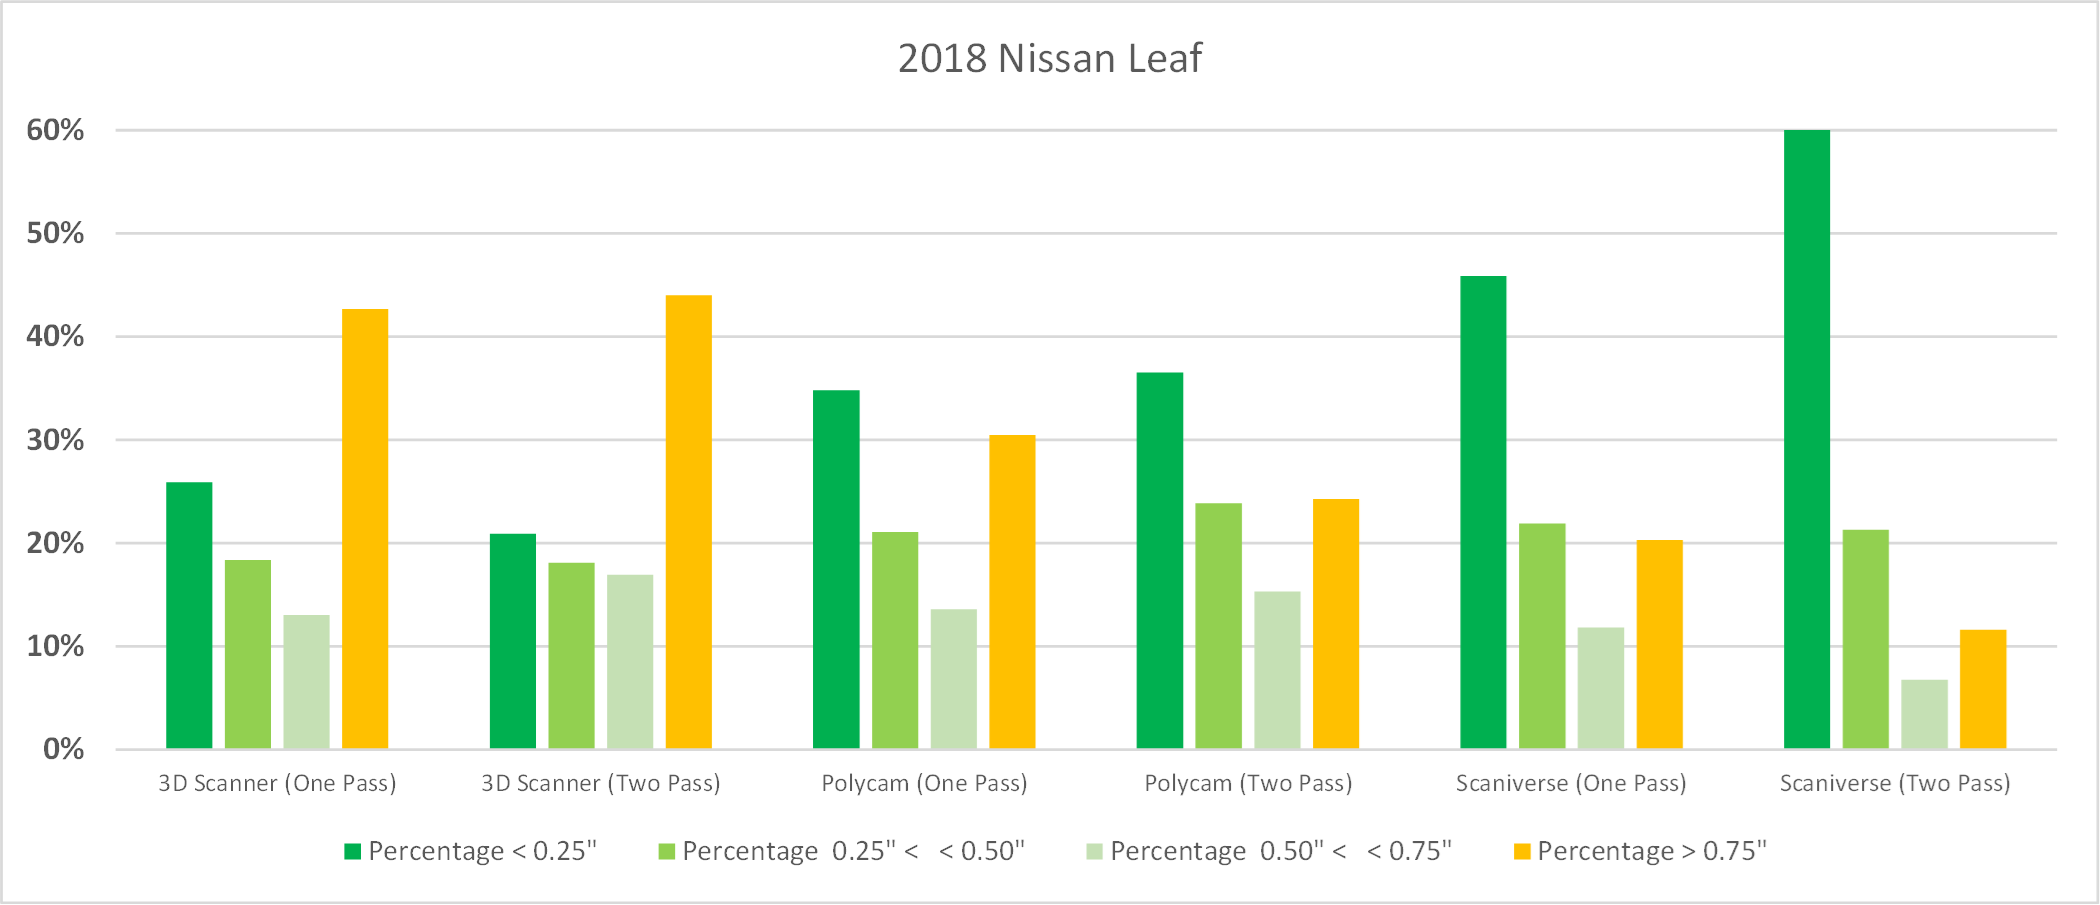 Figure 12 - A comparison chart of the Grey 2018 Nissan Leaf: Percentages of points within specific distance